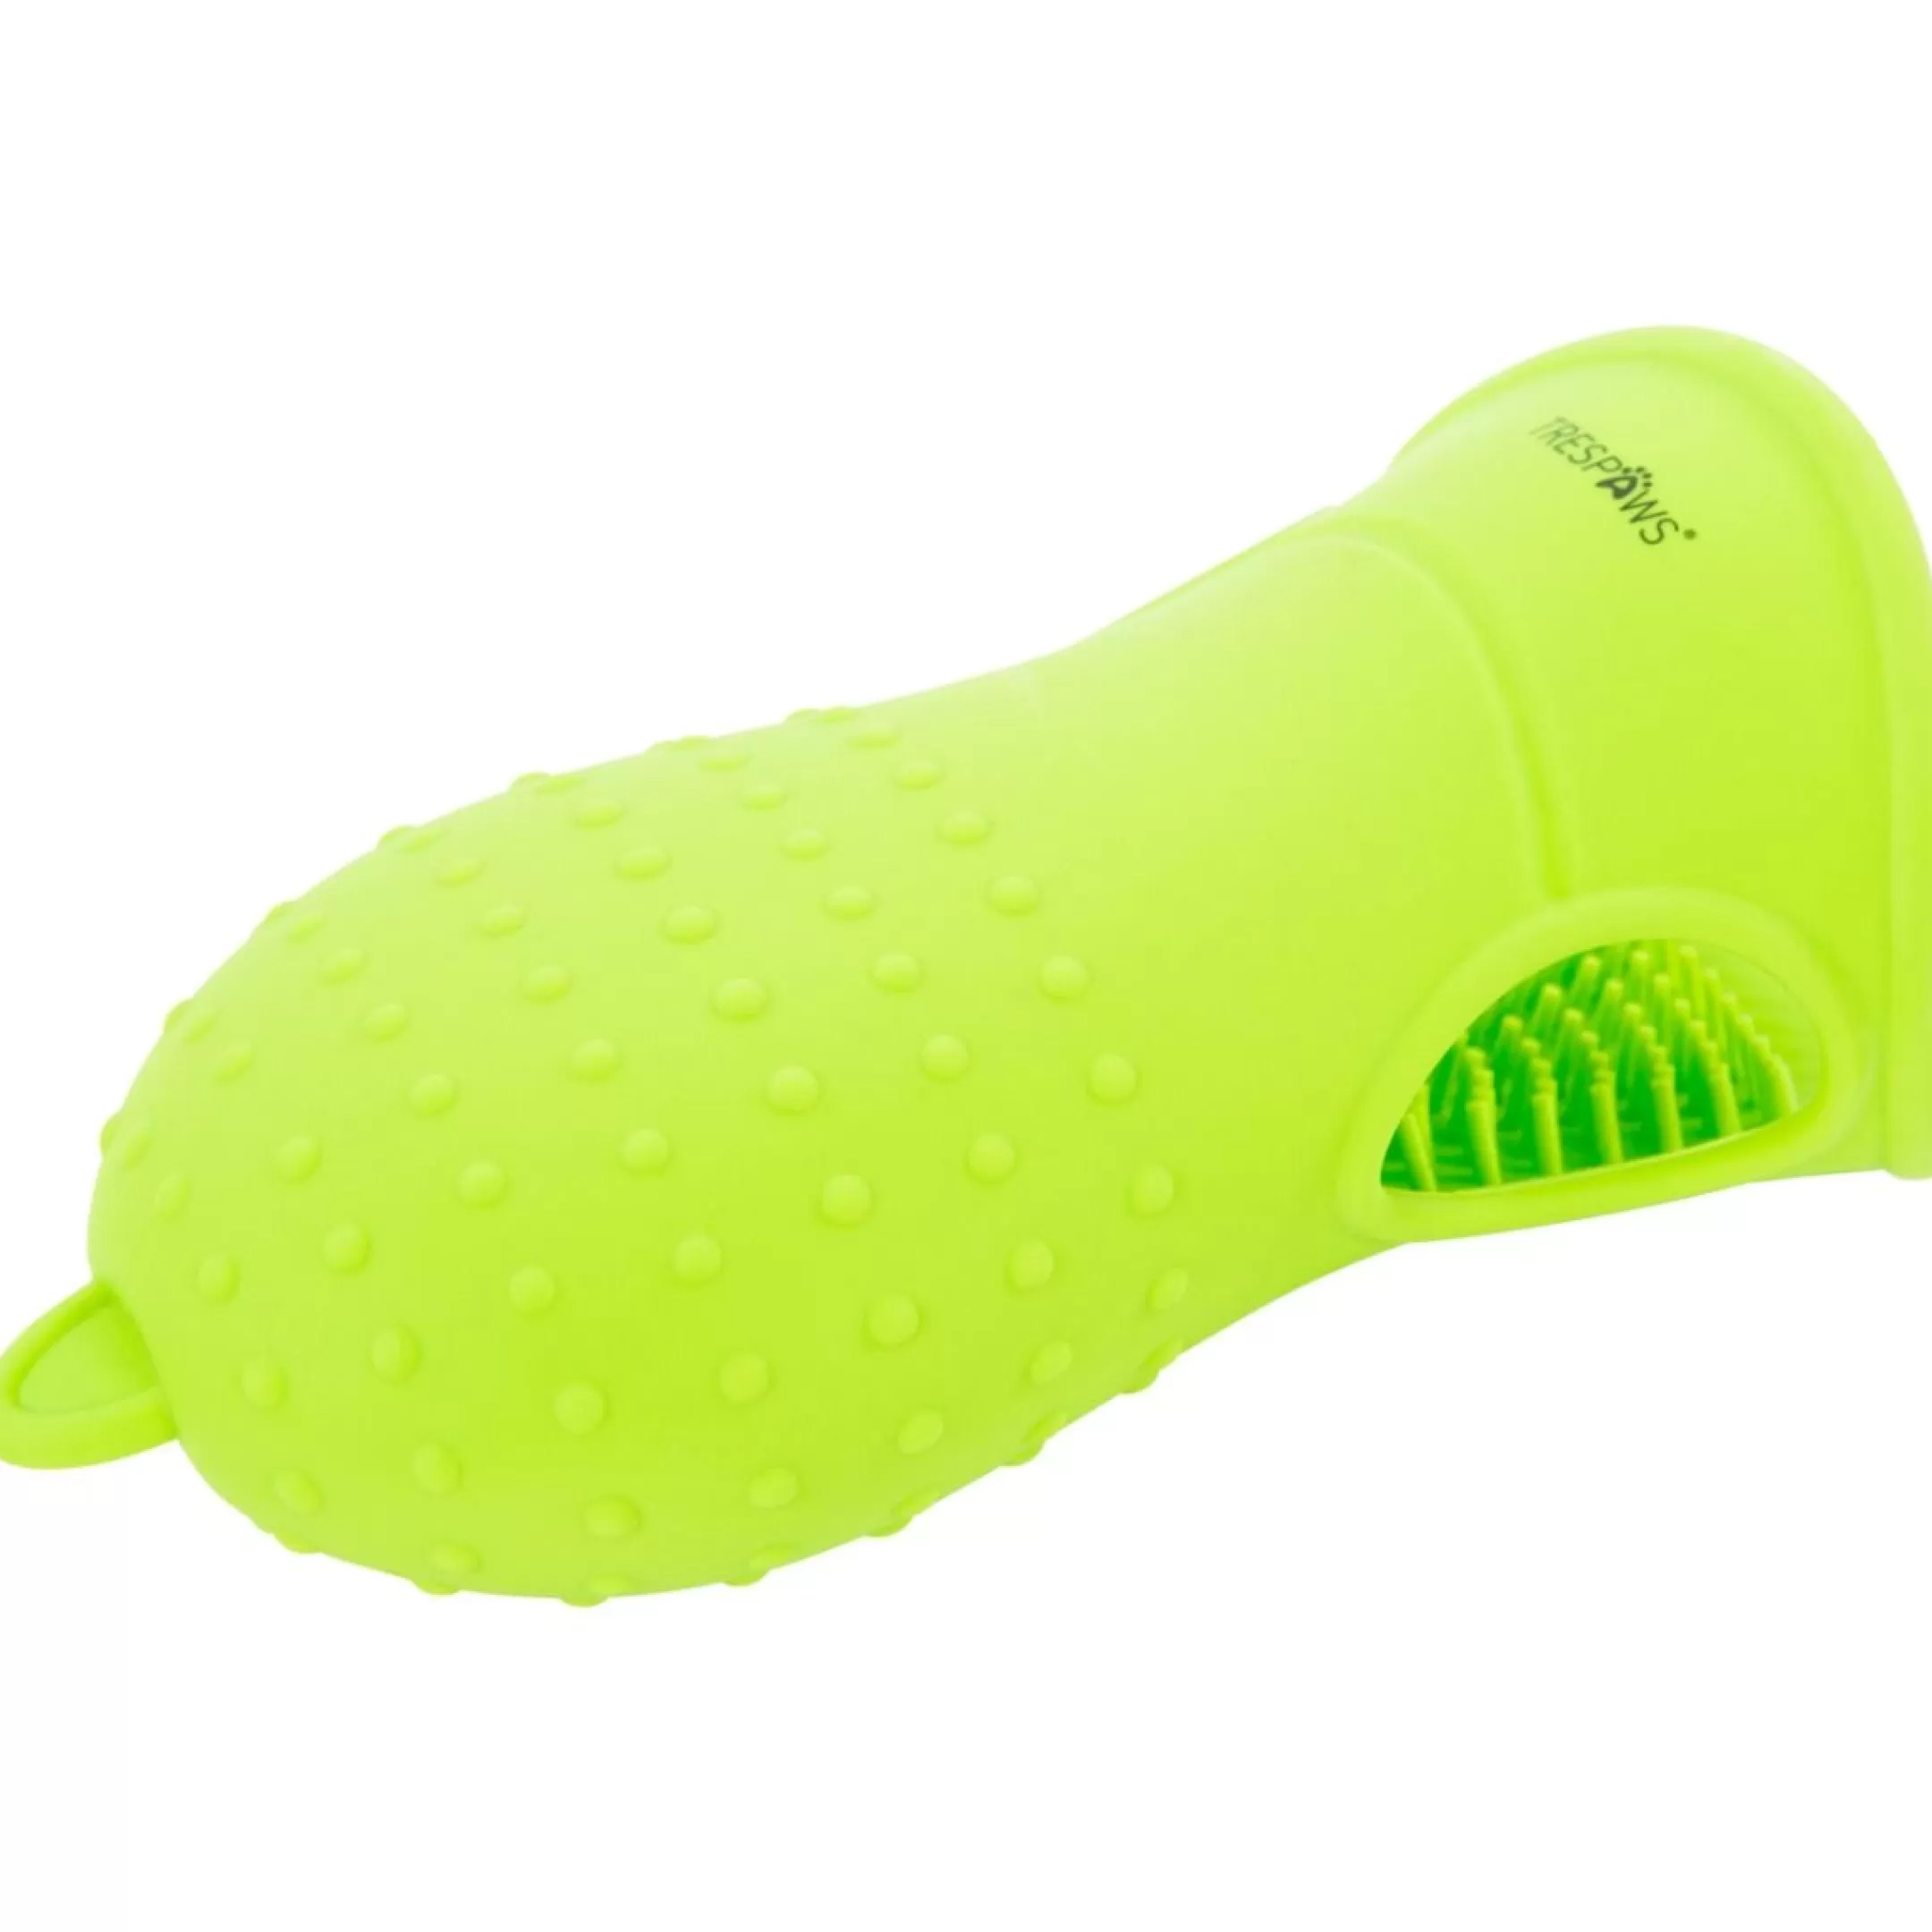 Trespaws Dual Paw Cleaner and Silicone Bathing Brush Mucky | Trespass Best Sale